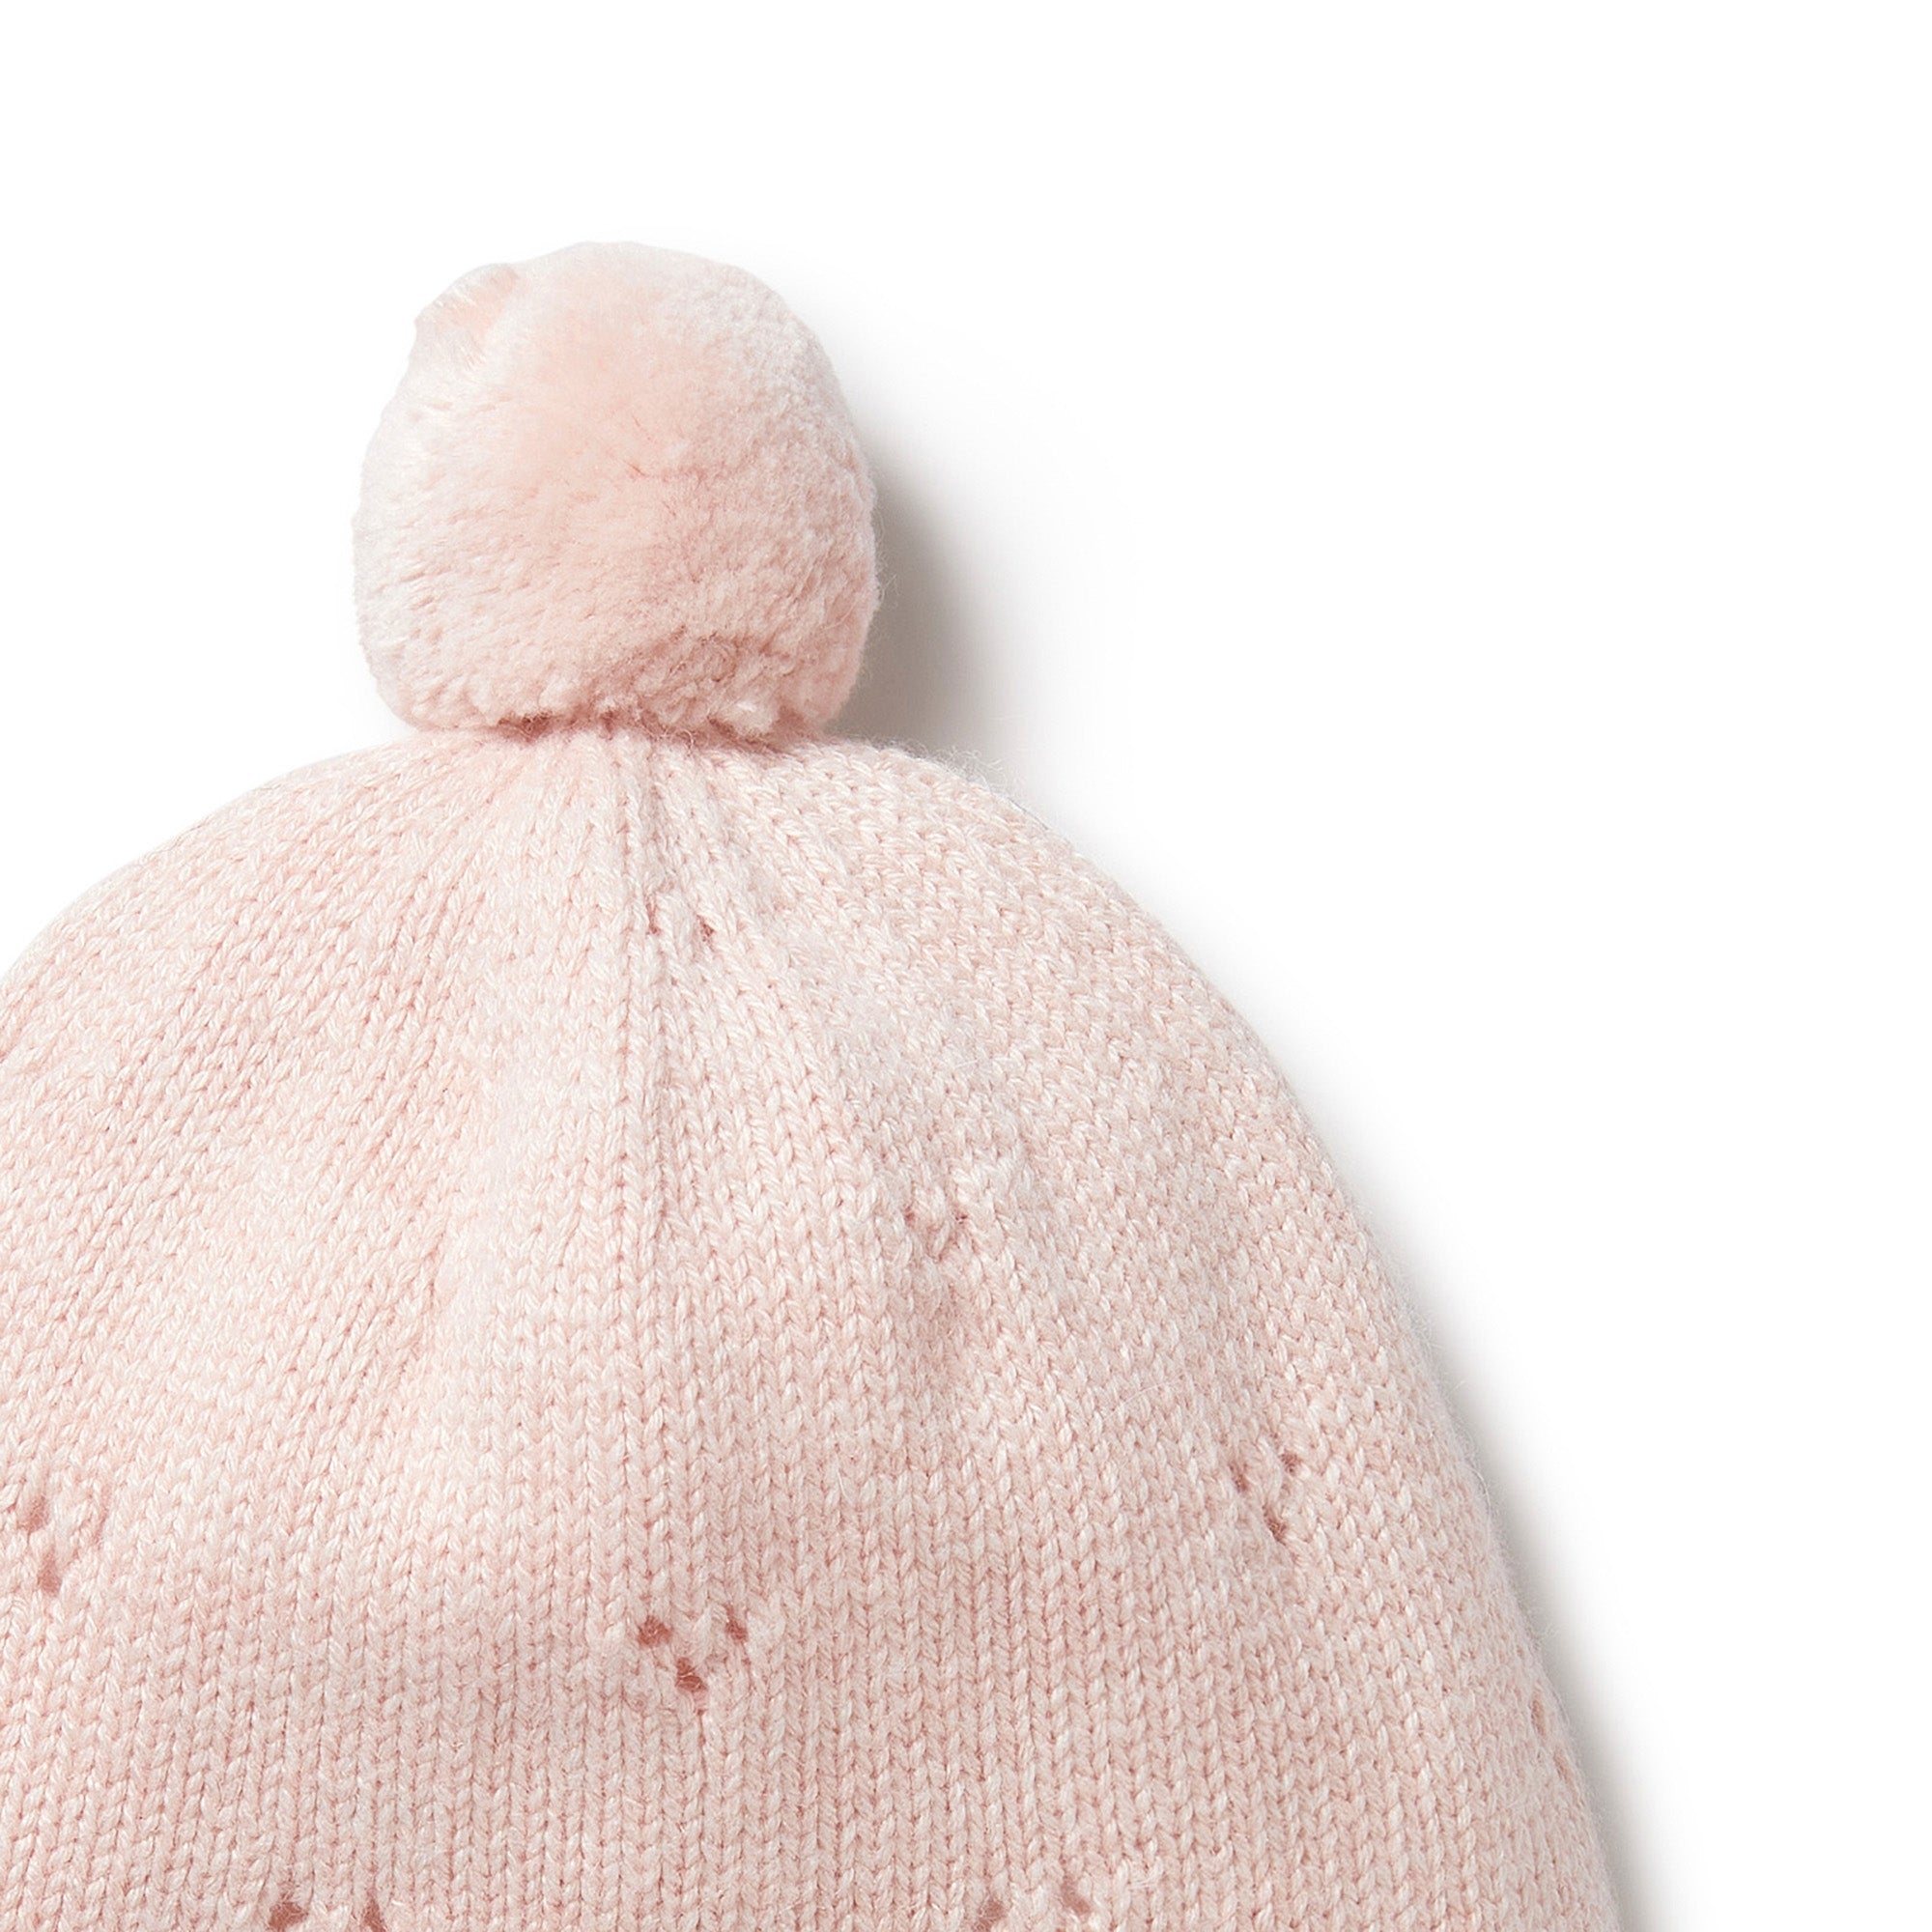 Wilson & Frenchy - Pink Knitted Pointelle Bonnet